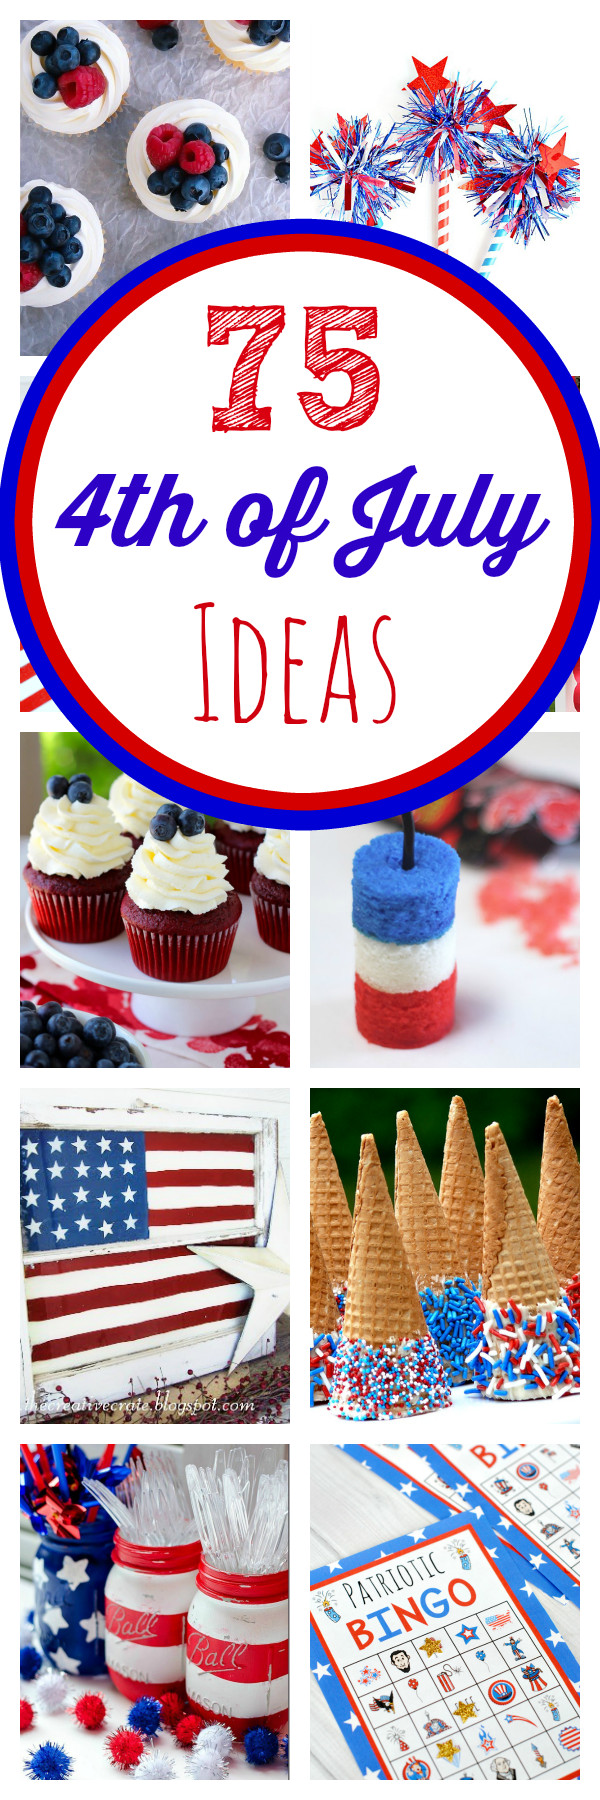 4th Of July Celebration Ideas
 The Ultimate Guide to 4th of July Party Ideas Crazy